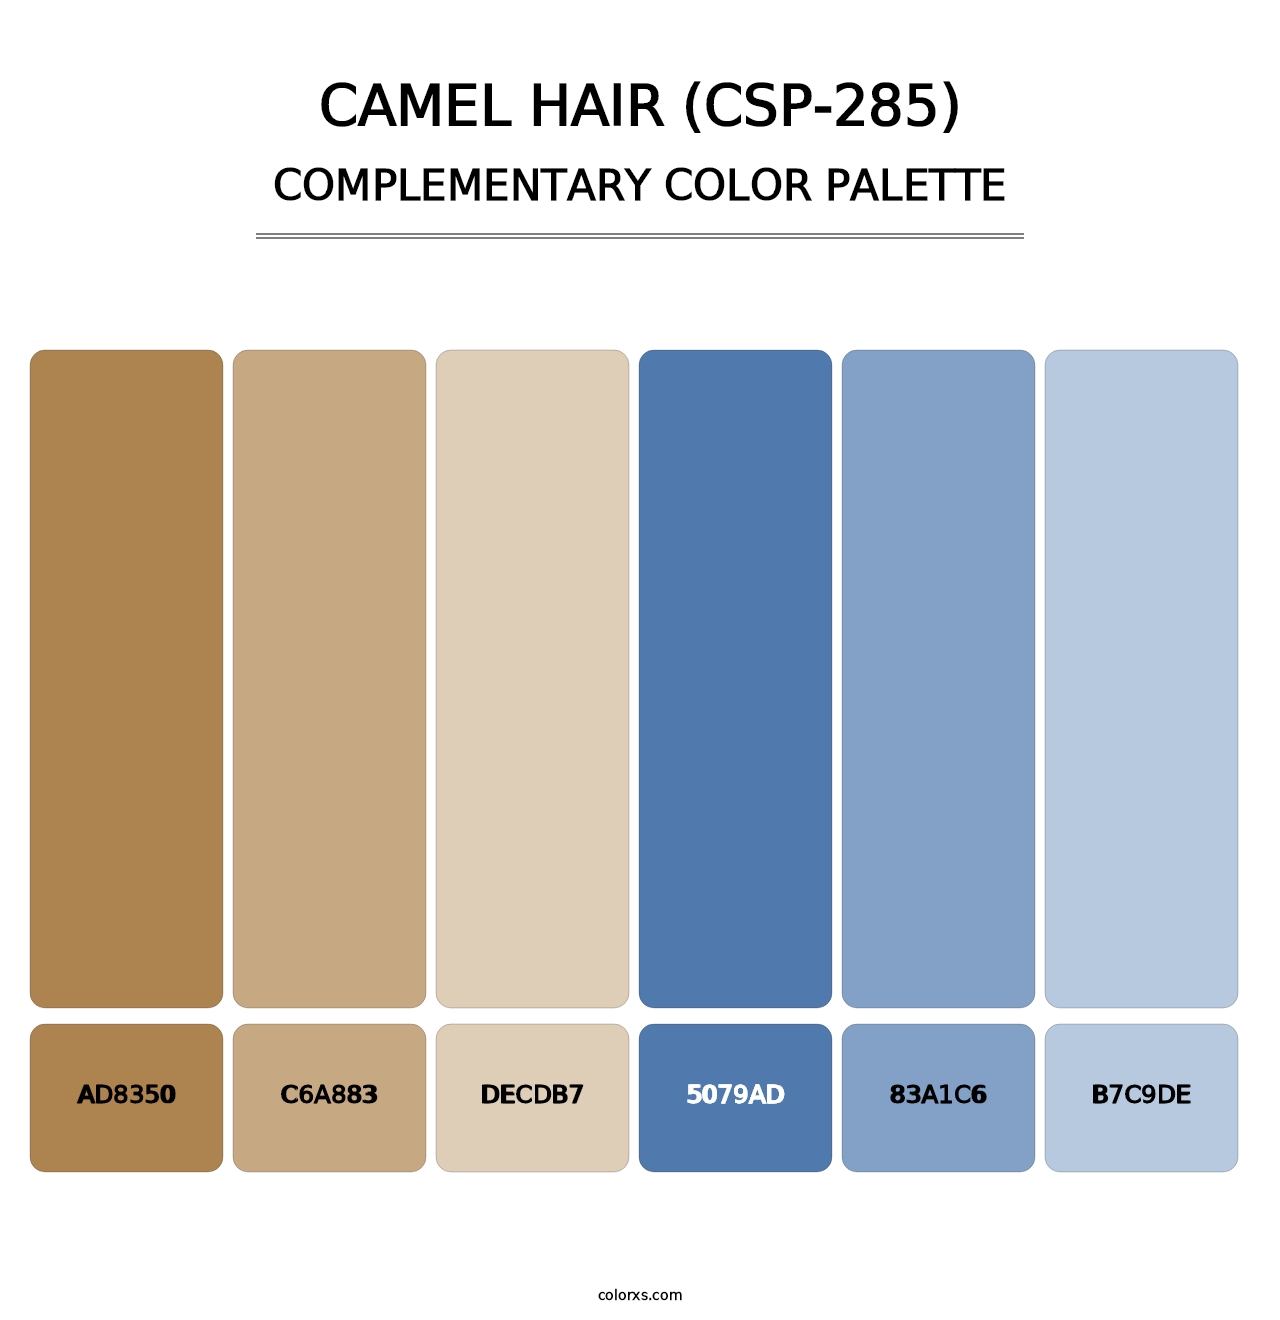 Camel Hair (CSP-285) - Complementary Color Palette